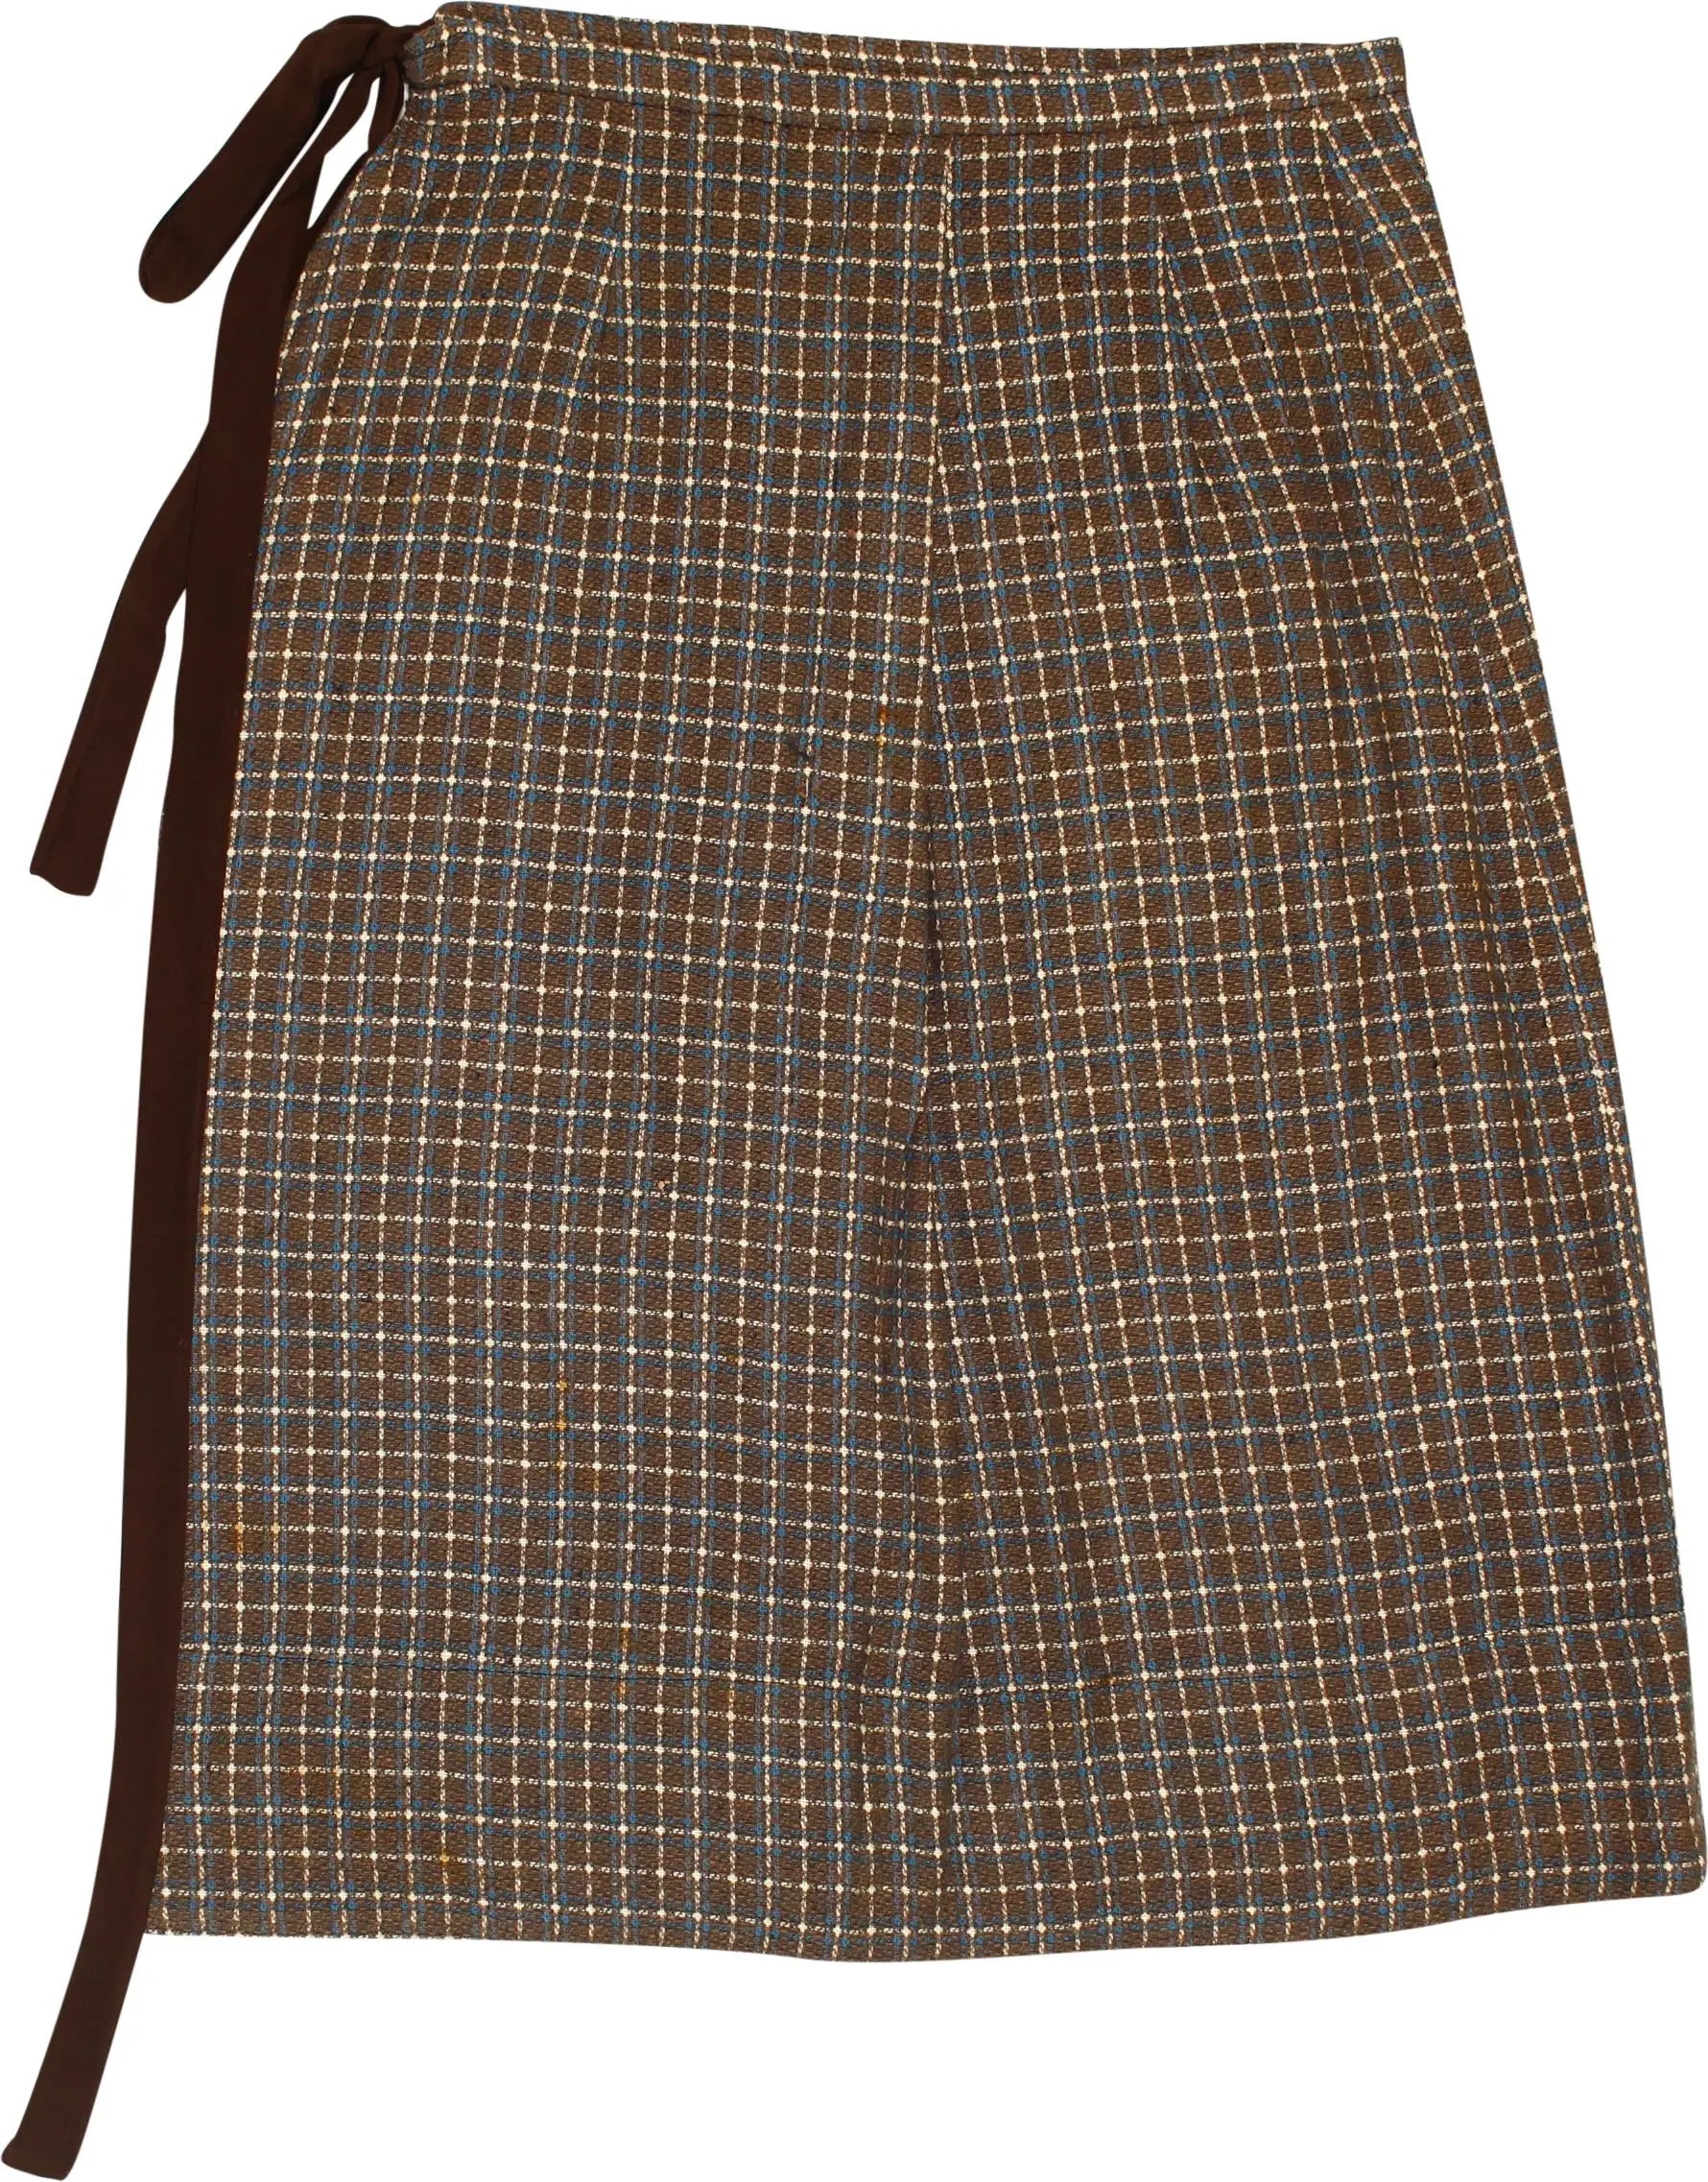 Kostumhaus Verch - Checked Apron Skirt- ThriftTale.com - Vintage and second handclothing